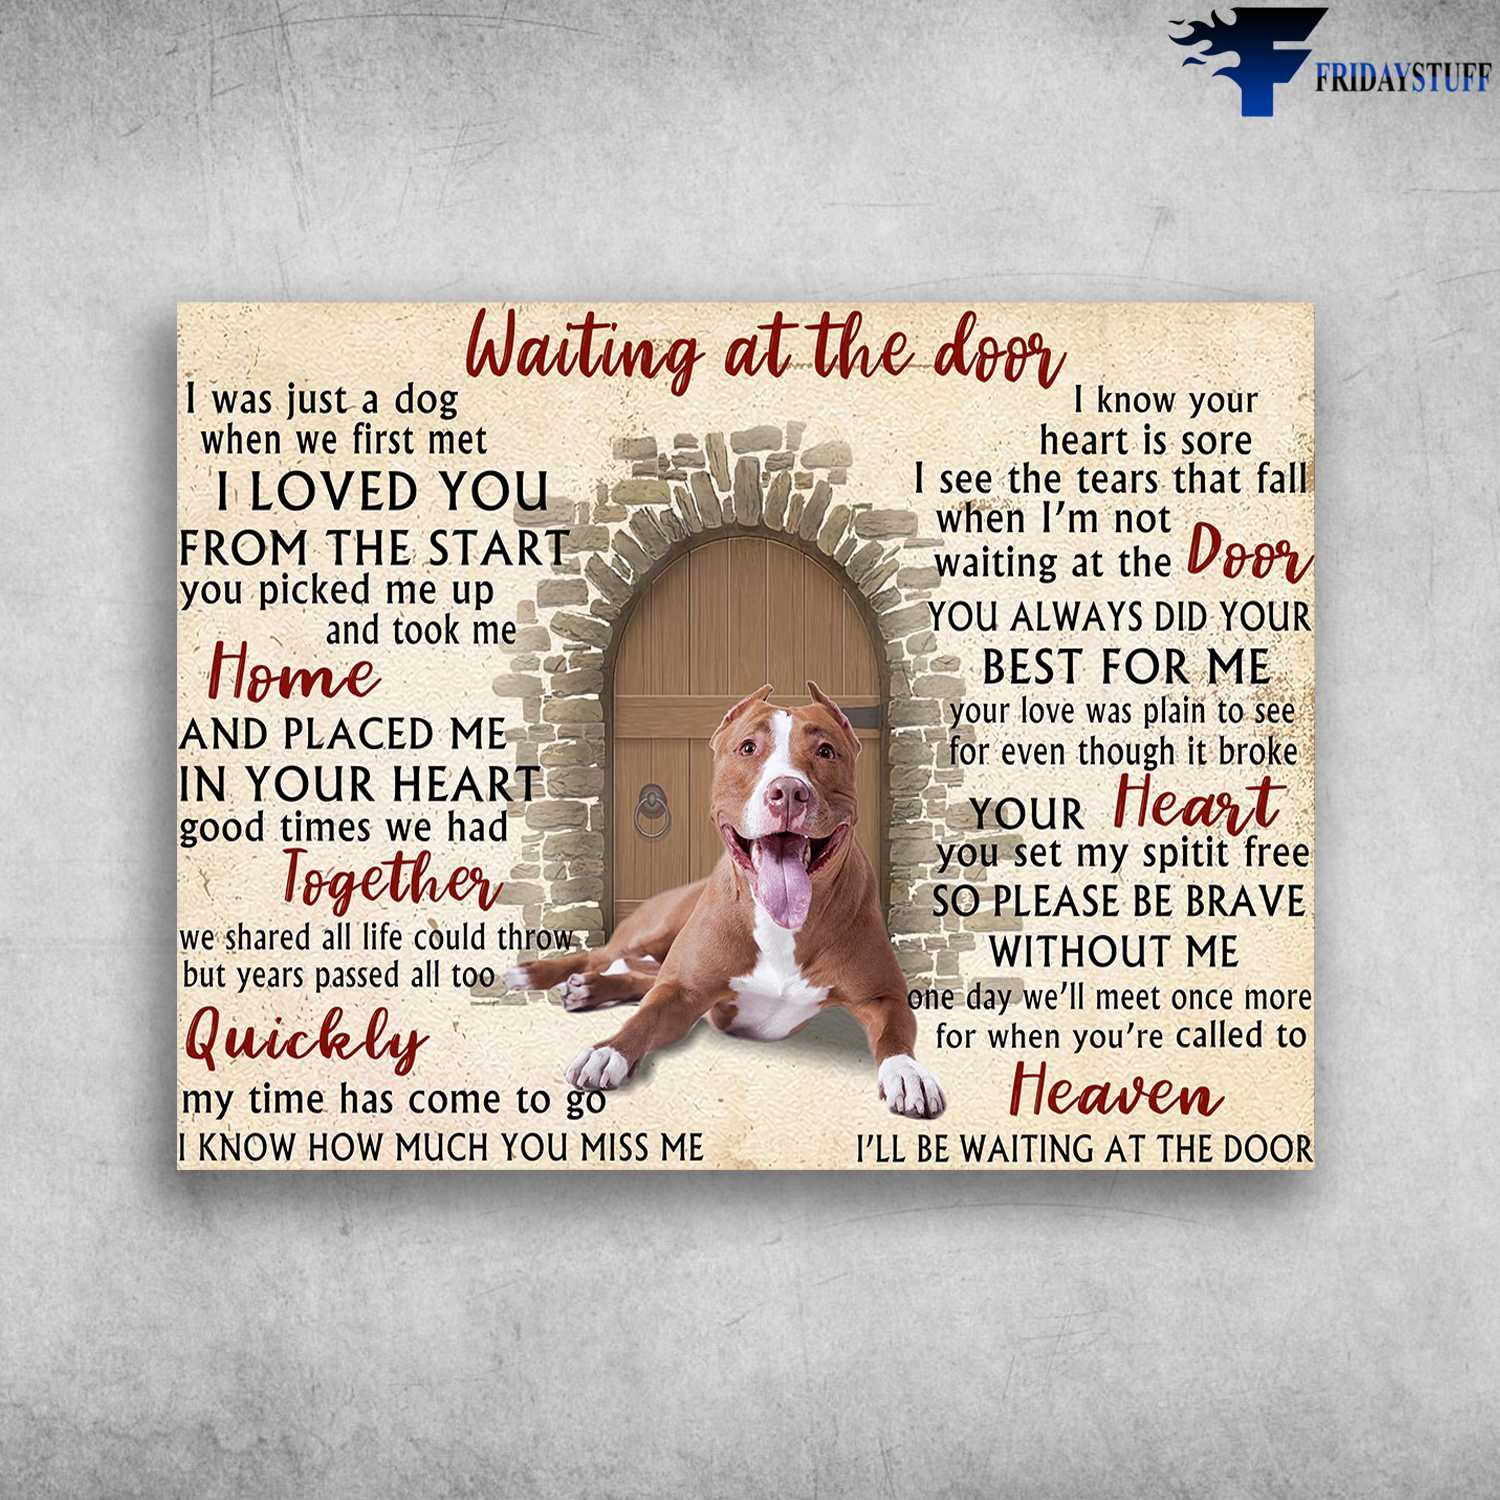 Pitbull Dog, Dog Lover - Waiting At The Door, I Was Just A Dog, When We First Met, I Loved You, From The Start, You Picked Me Up And Took Me Home, And Placed Me Is Your Heart, Goof Times We Had Together